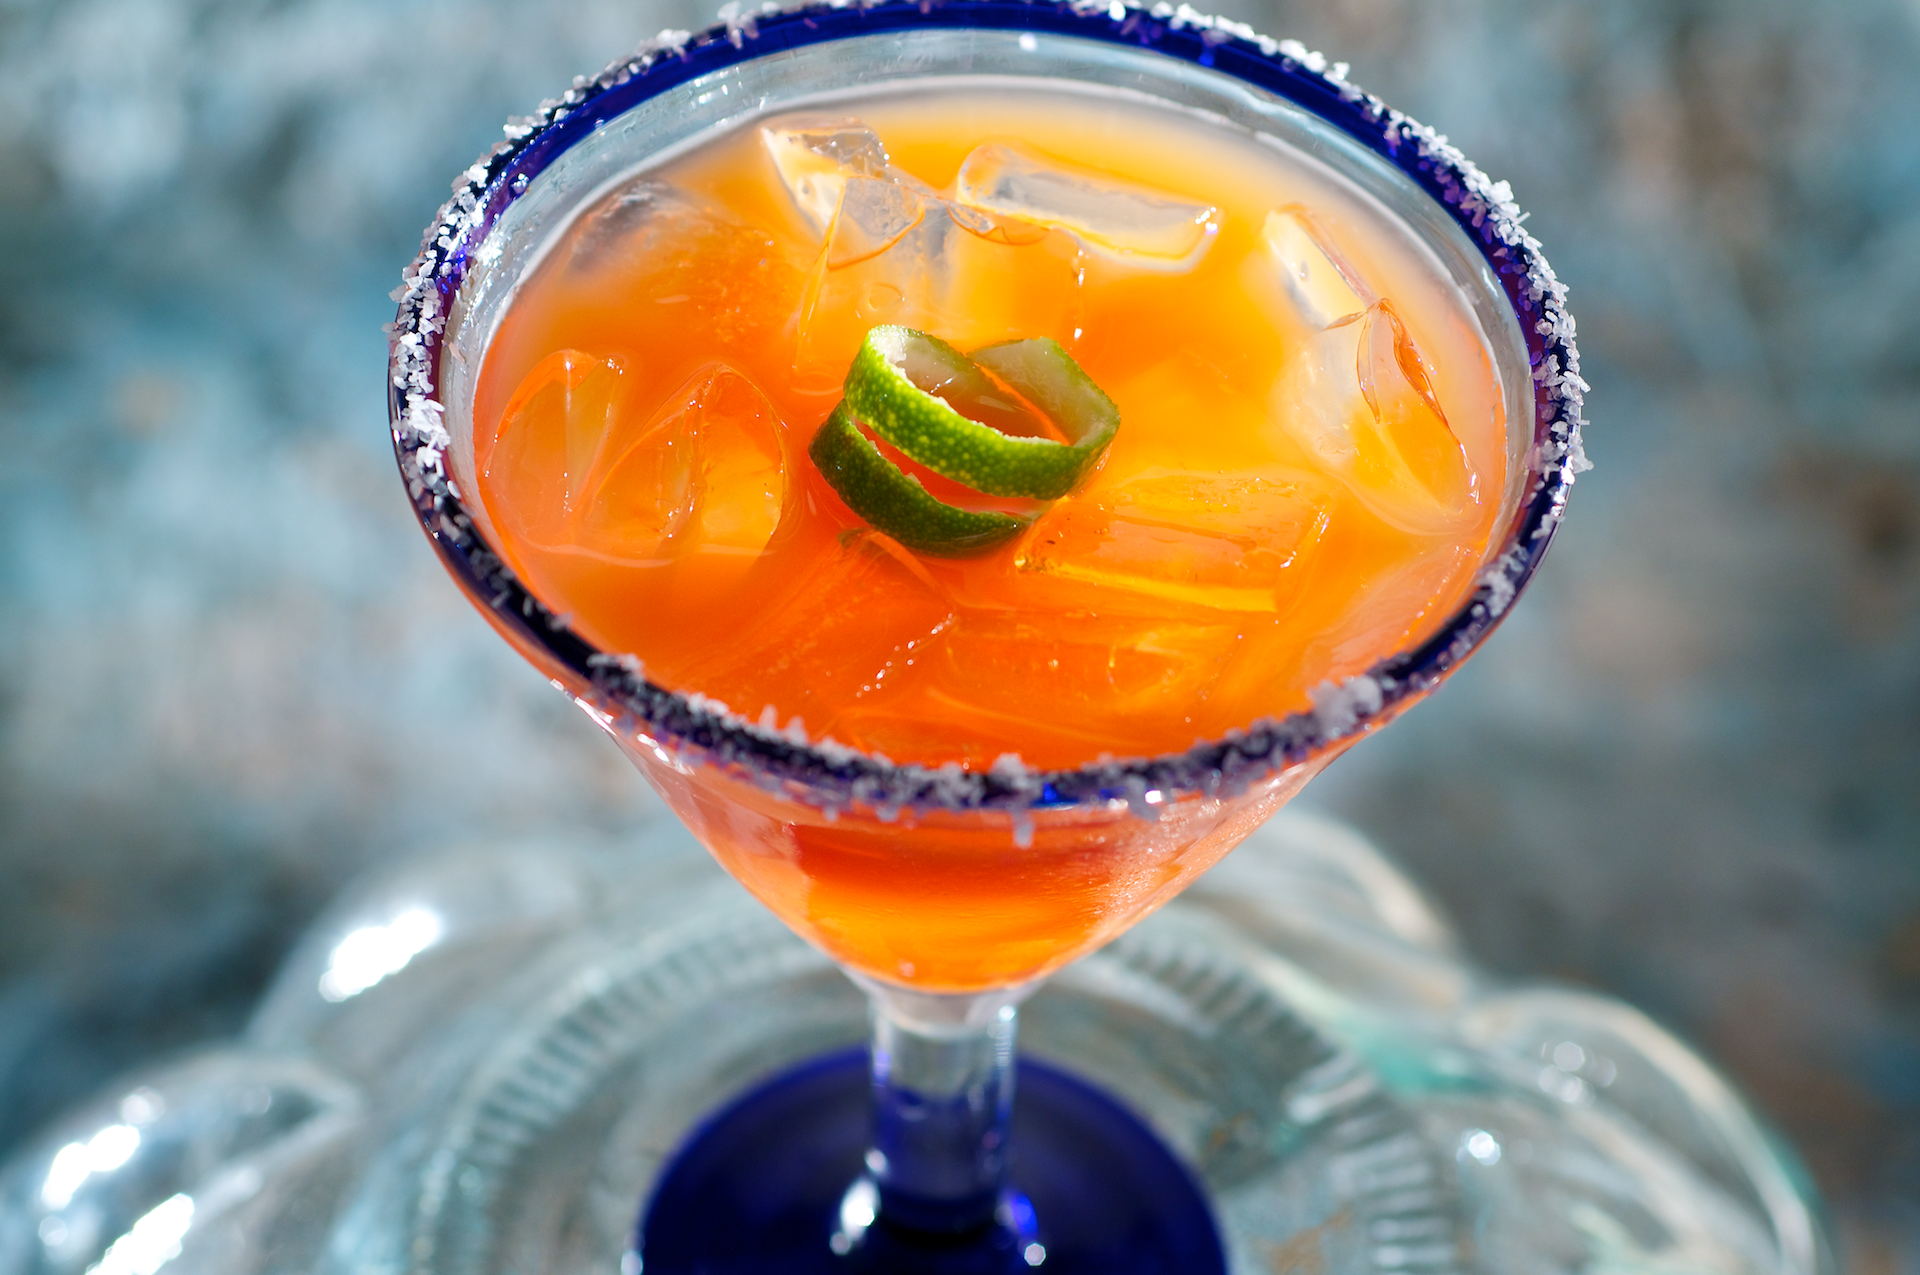 This Blood Orange variation of a classic margarita is refreshing and delicious with a bright red/orange color that sets the party mood instantly.